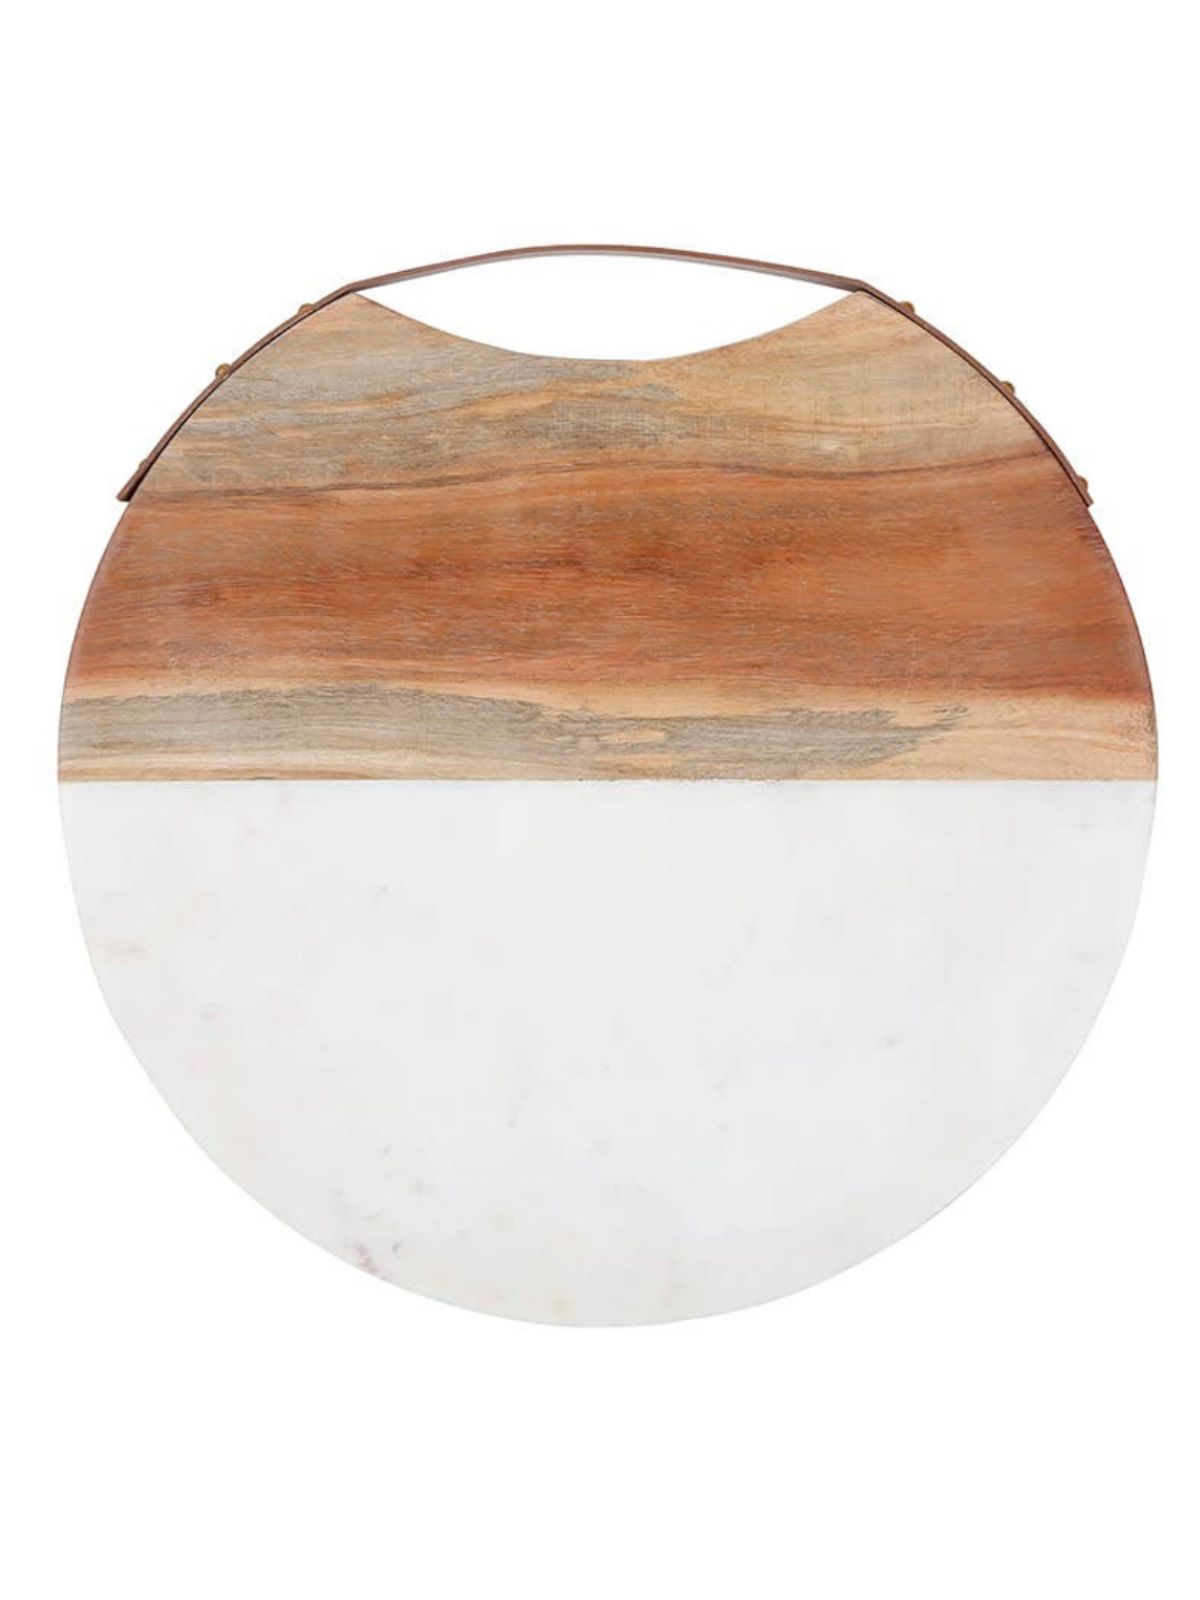 Round Marble and Acacia Wood Serving Board, Top View.